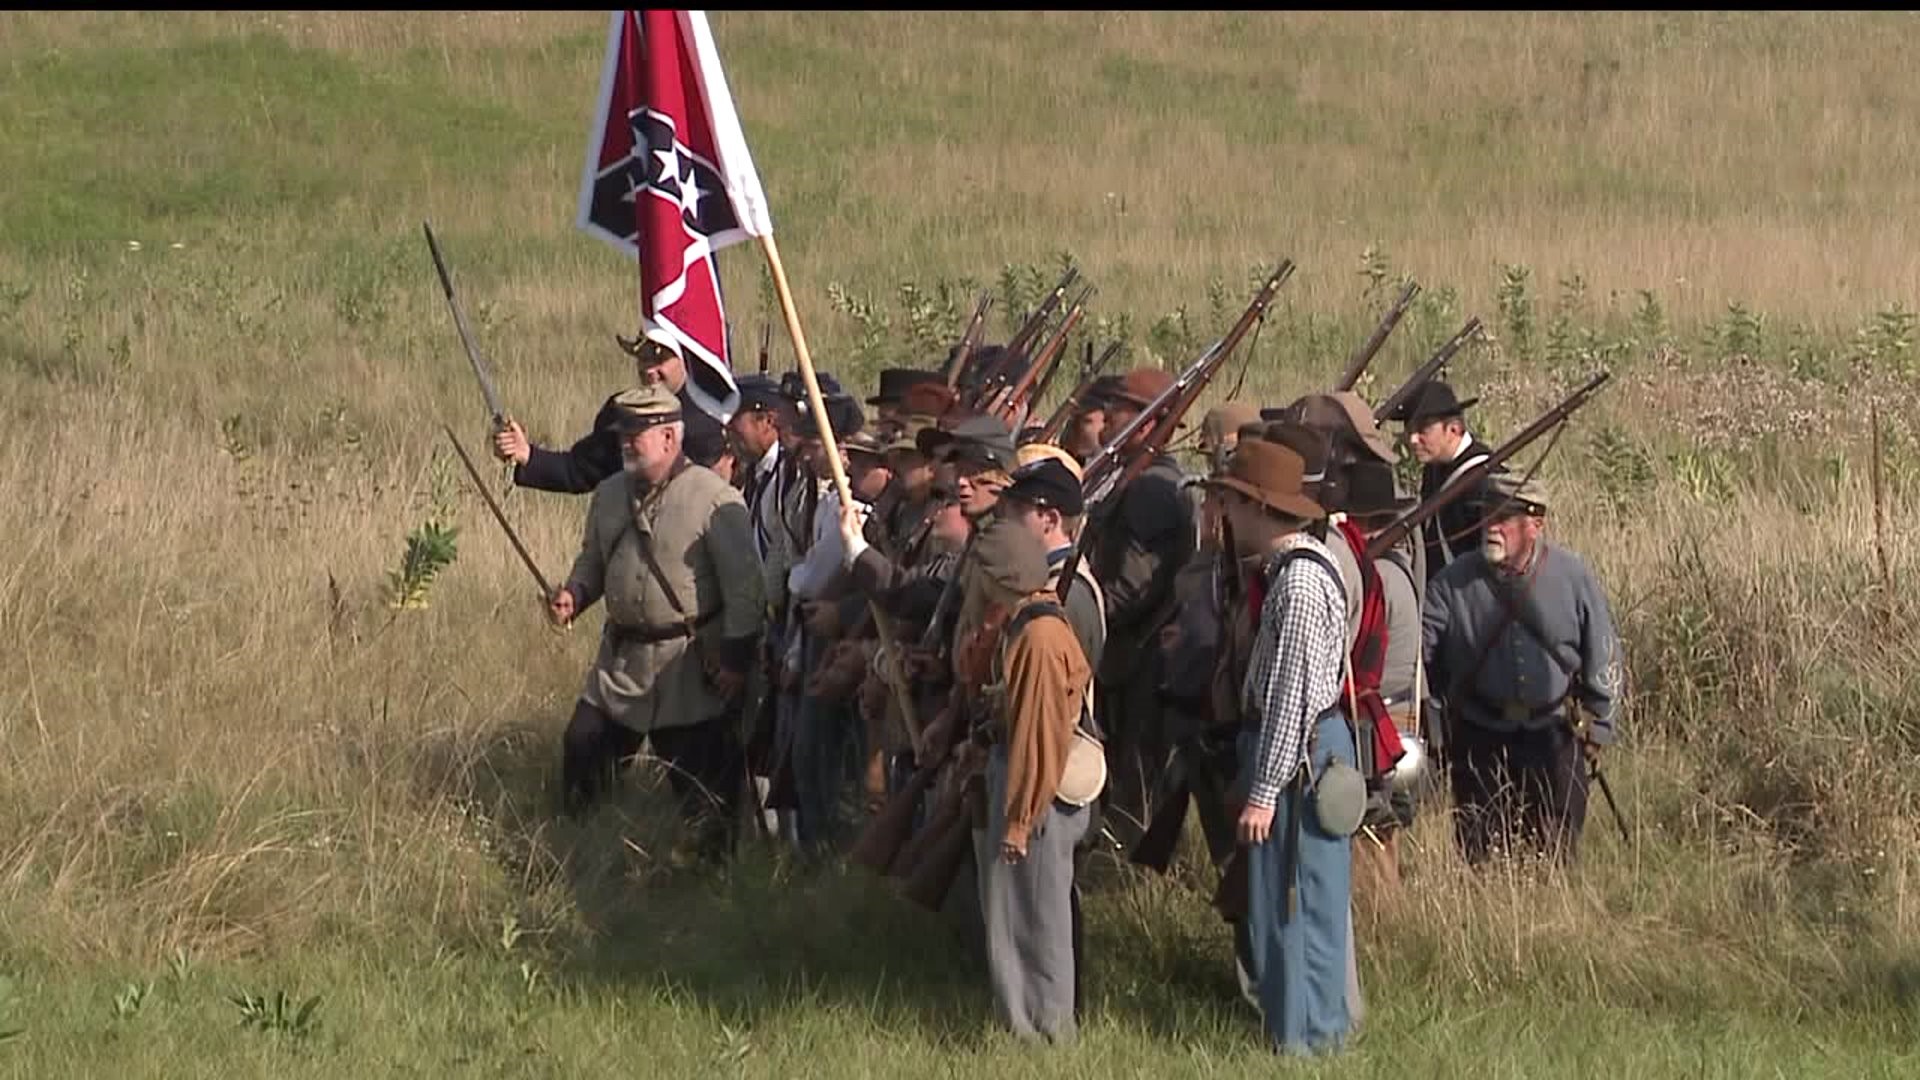 Several protests expected to take place in Gettysburg during the 154th anniversary of the Civil War battle